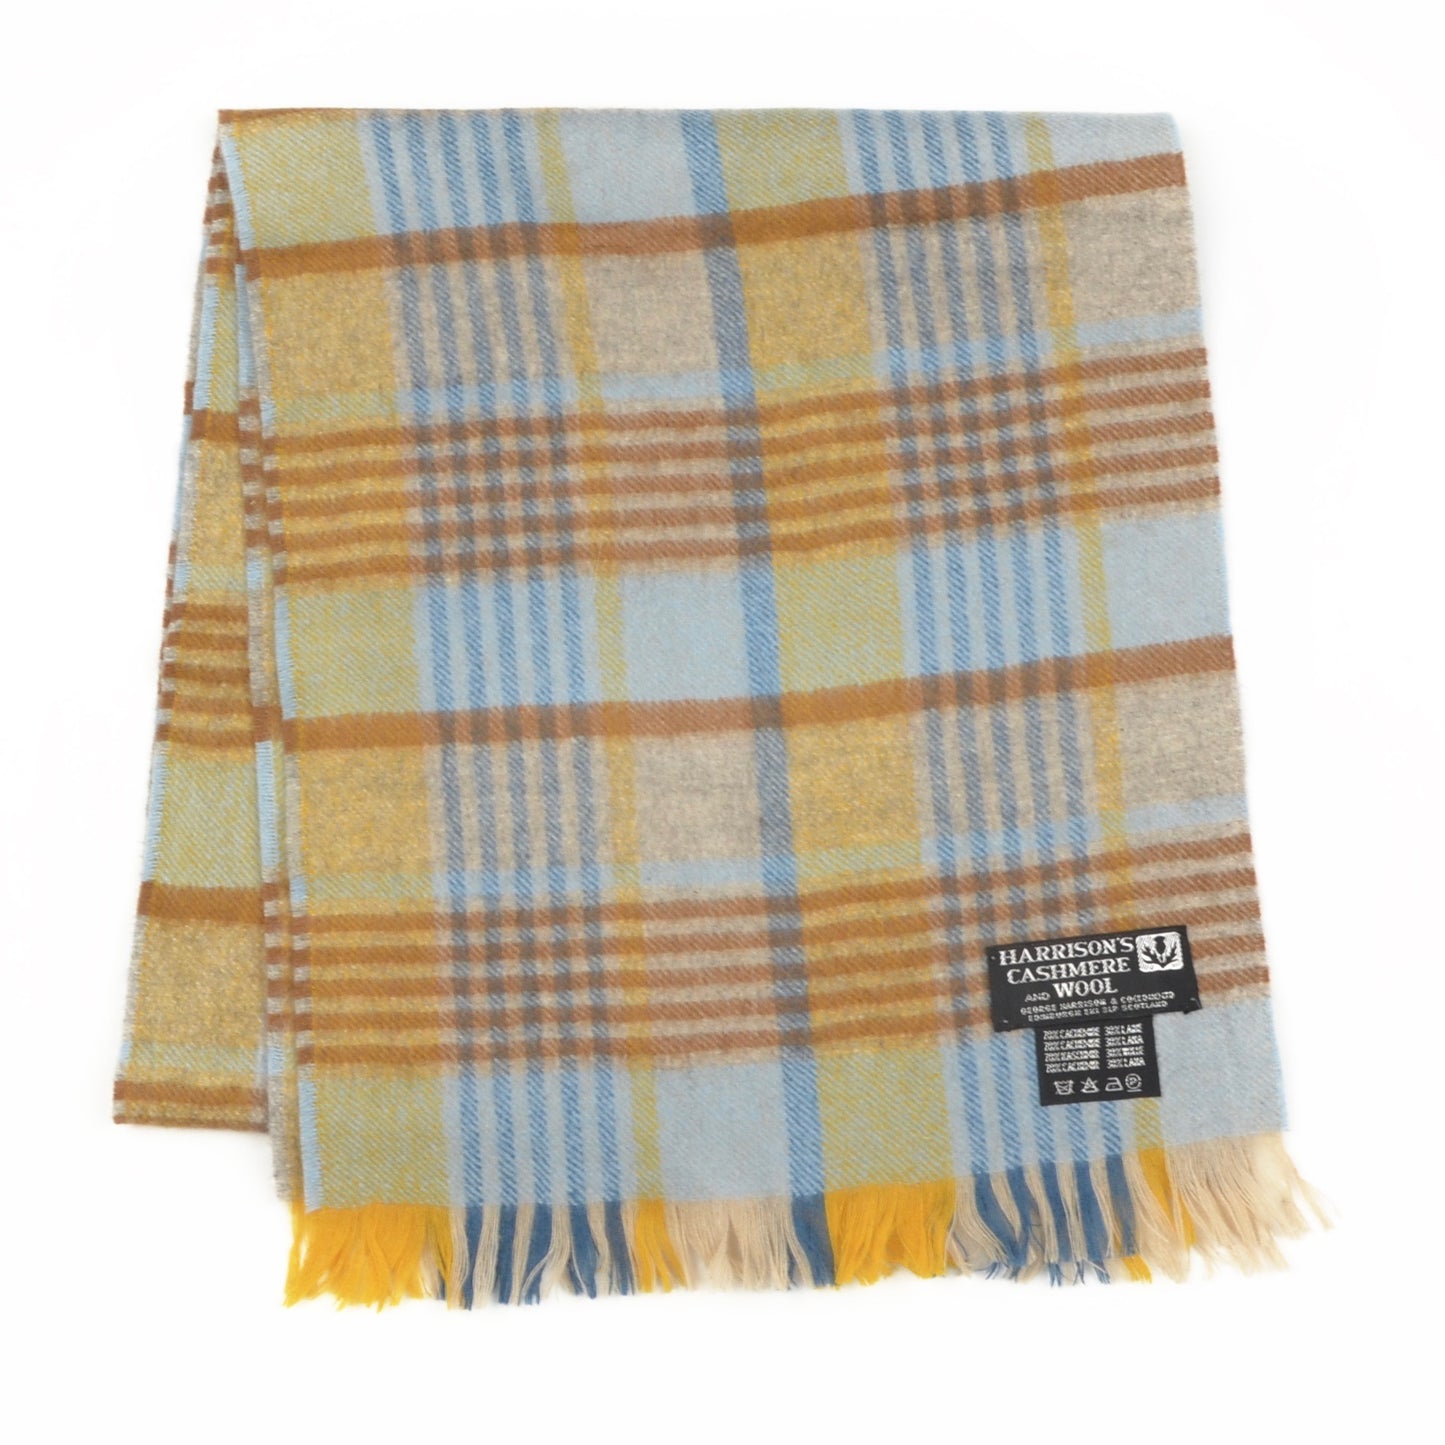 Plaid Cashmere & Wool Scarf by Harrisons - Blue & Yellow